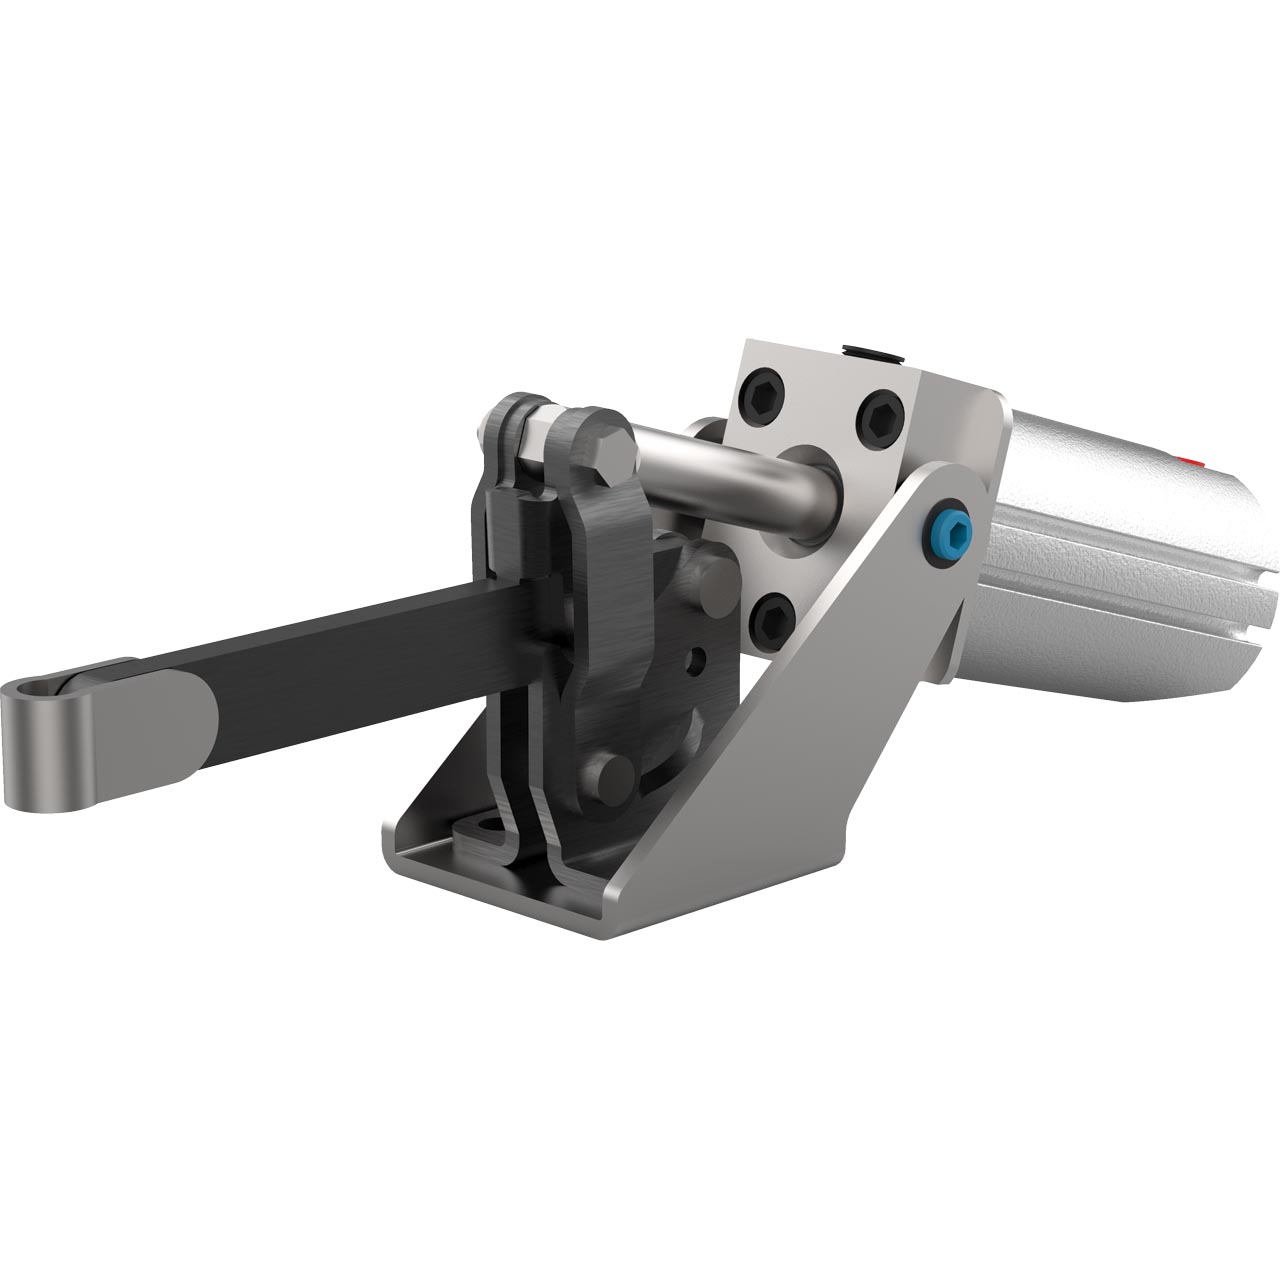 DE-STA-CO 846 Pneumatic Hold Down Action Clamp 